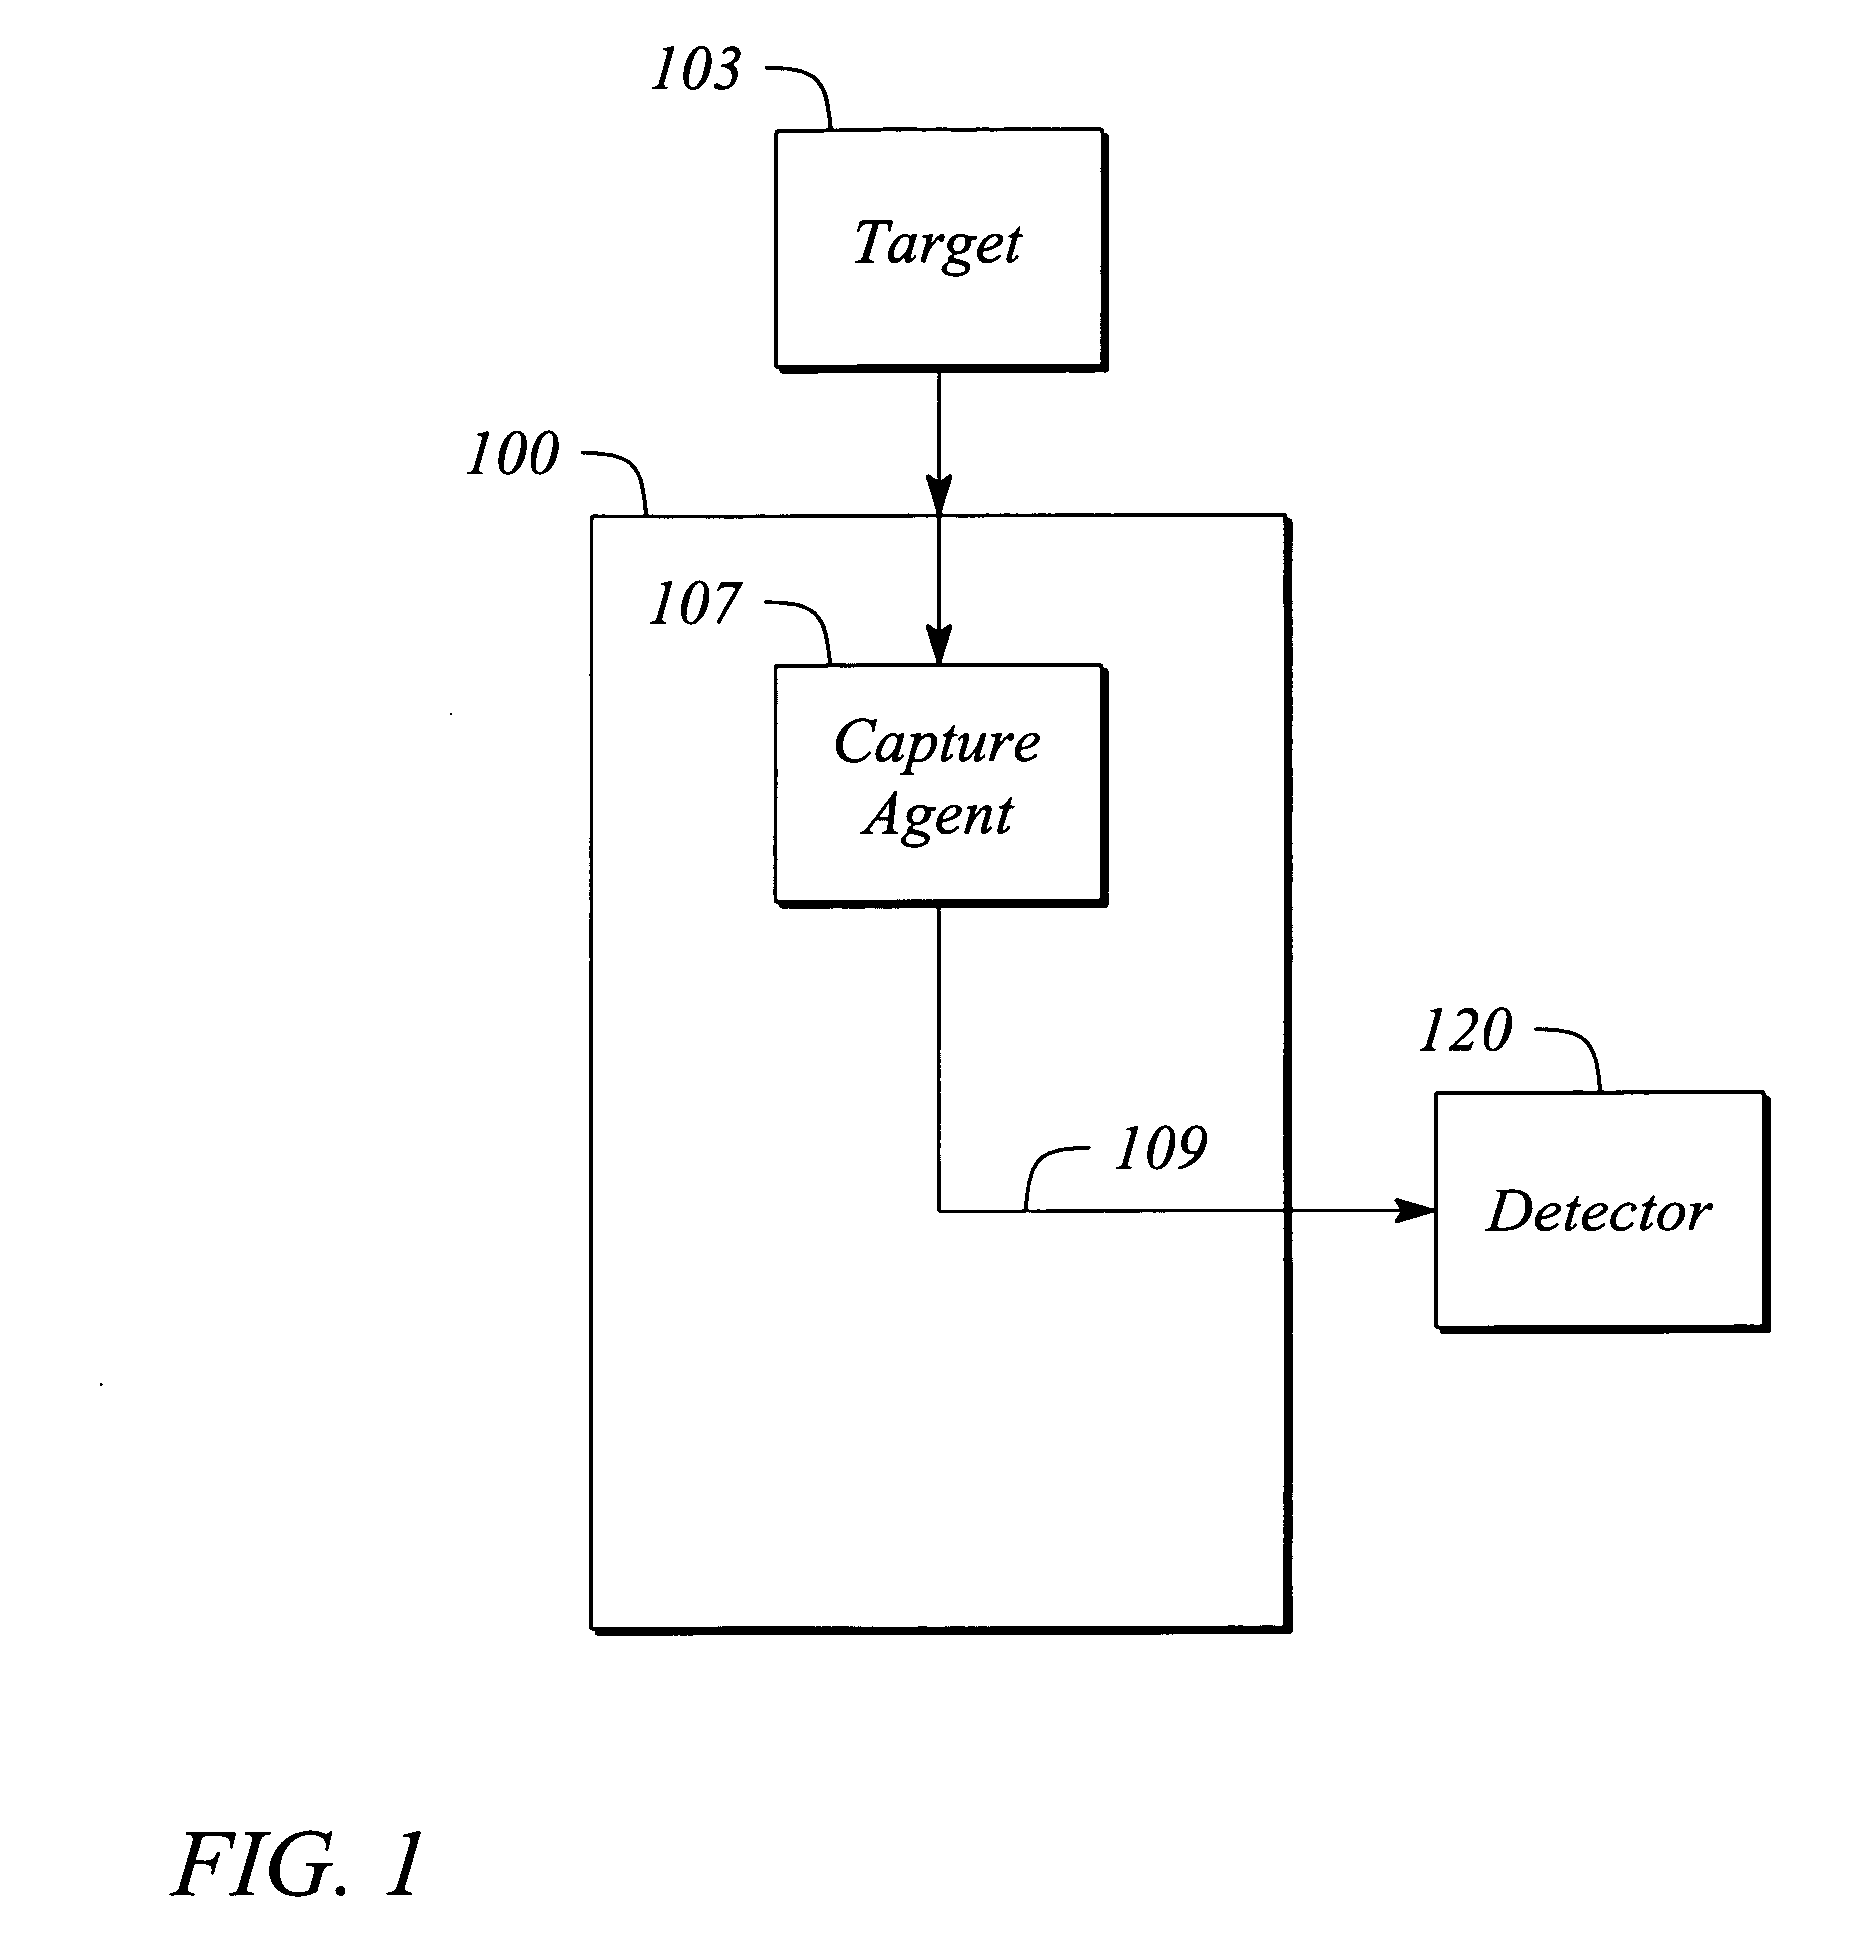 Microarray based affinity purification and analysis device coupled with solid state nanopore electrodes